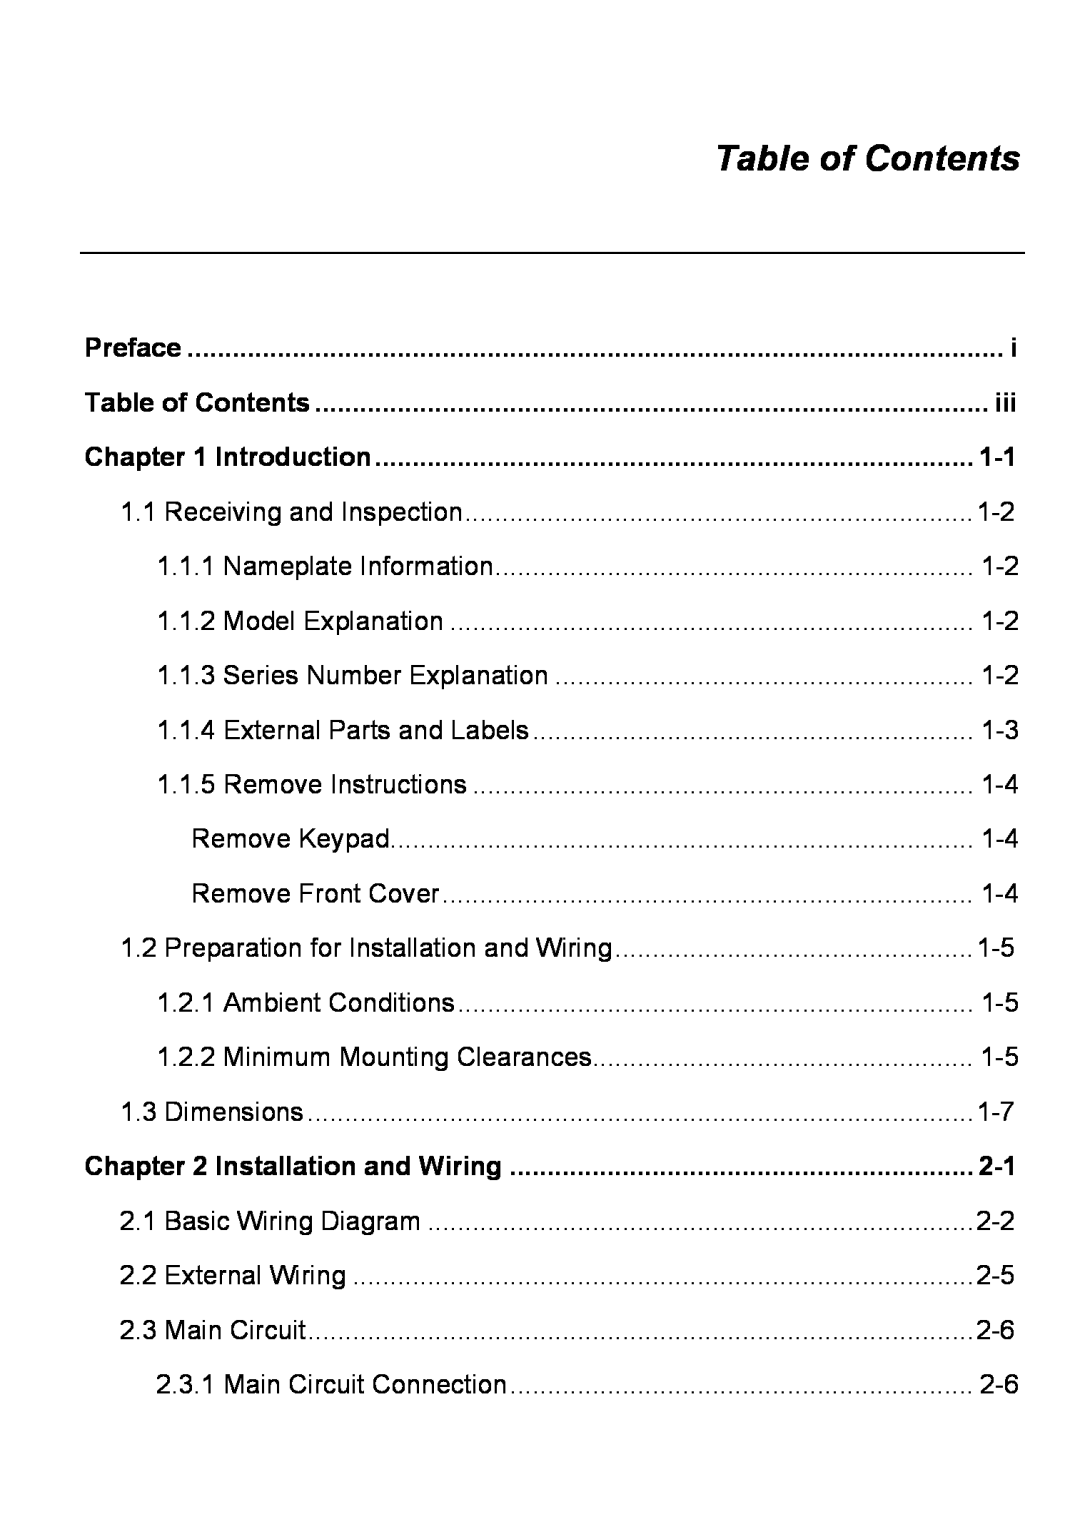 Delta Electronics VFD-M manual Table of Contents, Preface, Introduction, Installation and Wiring 